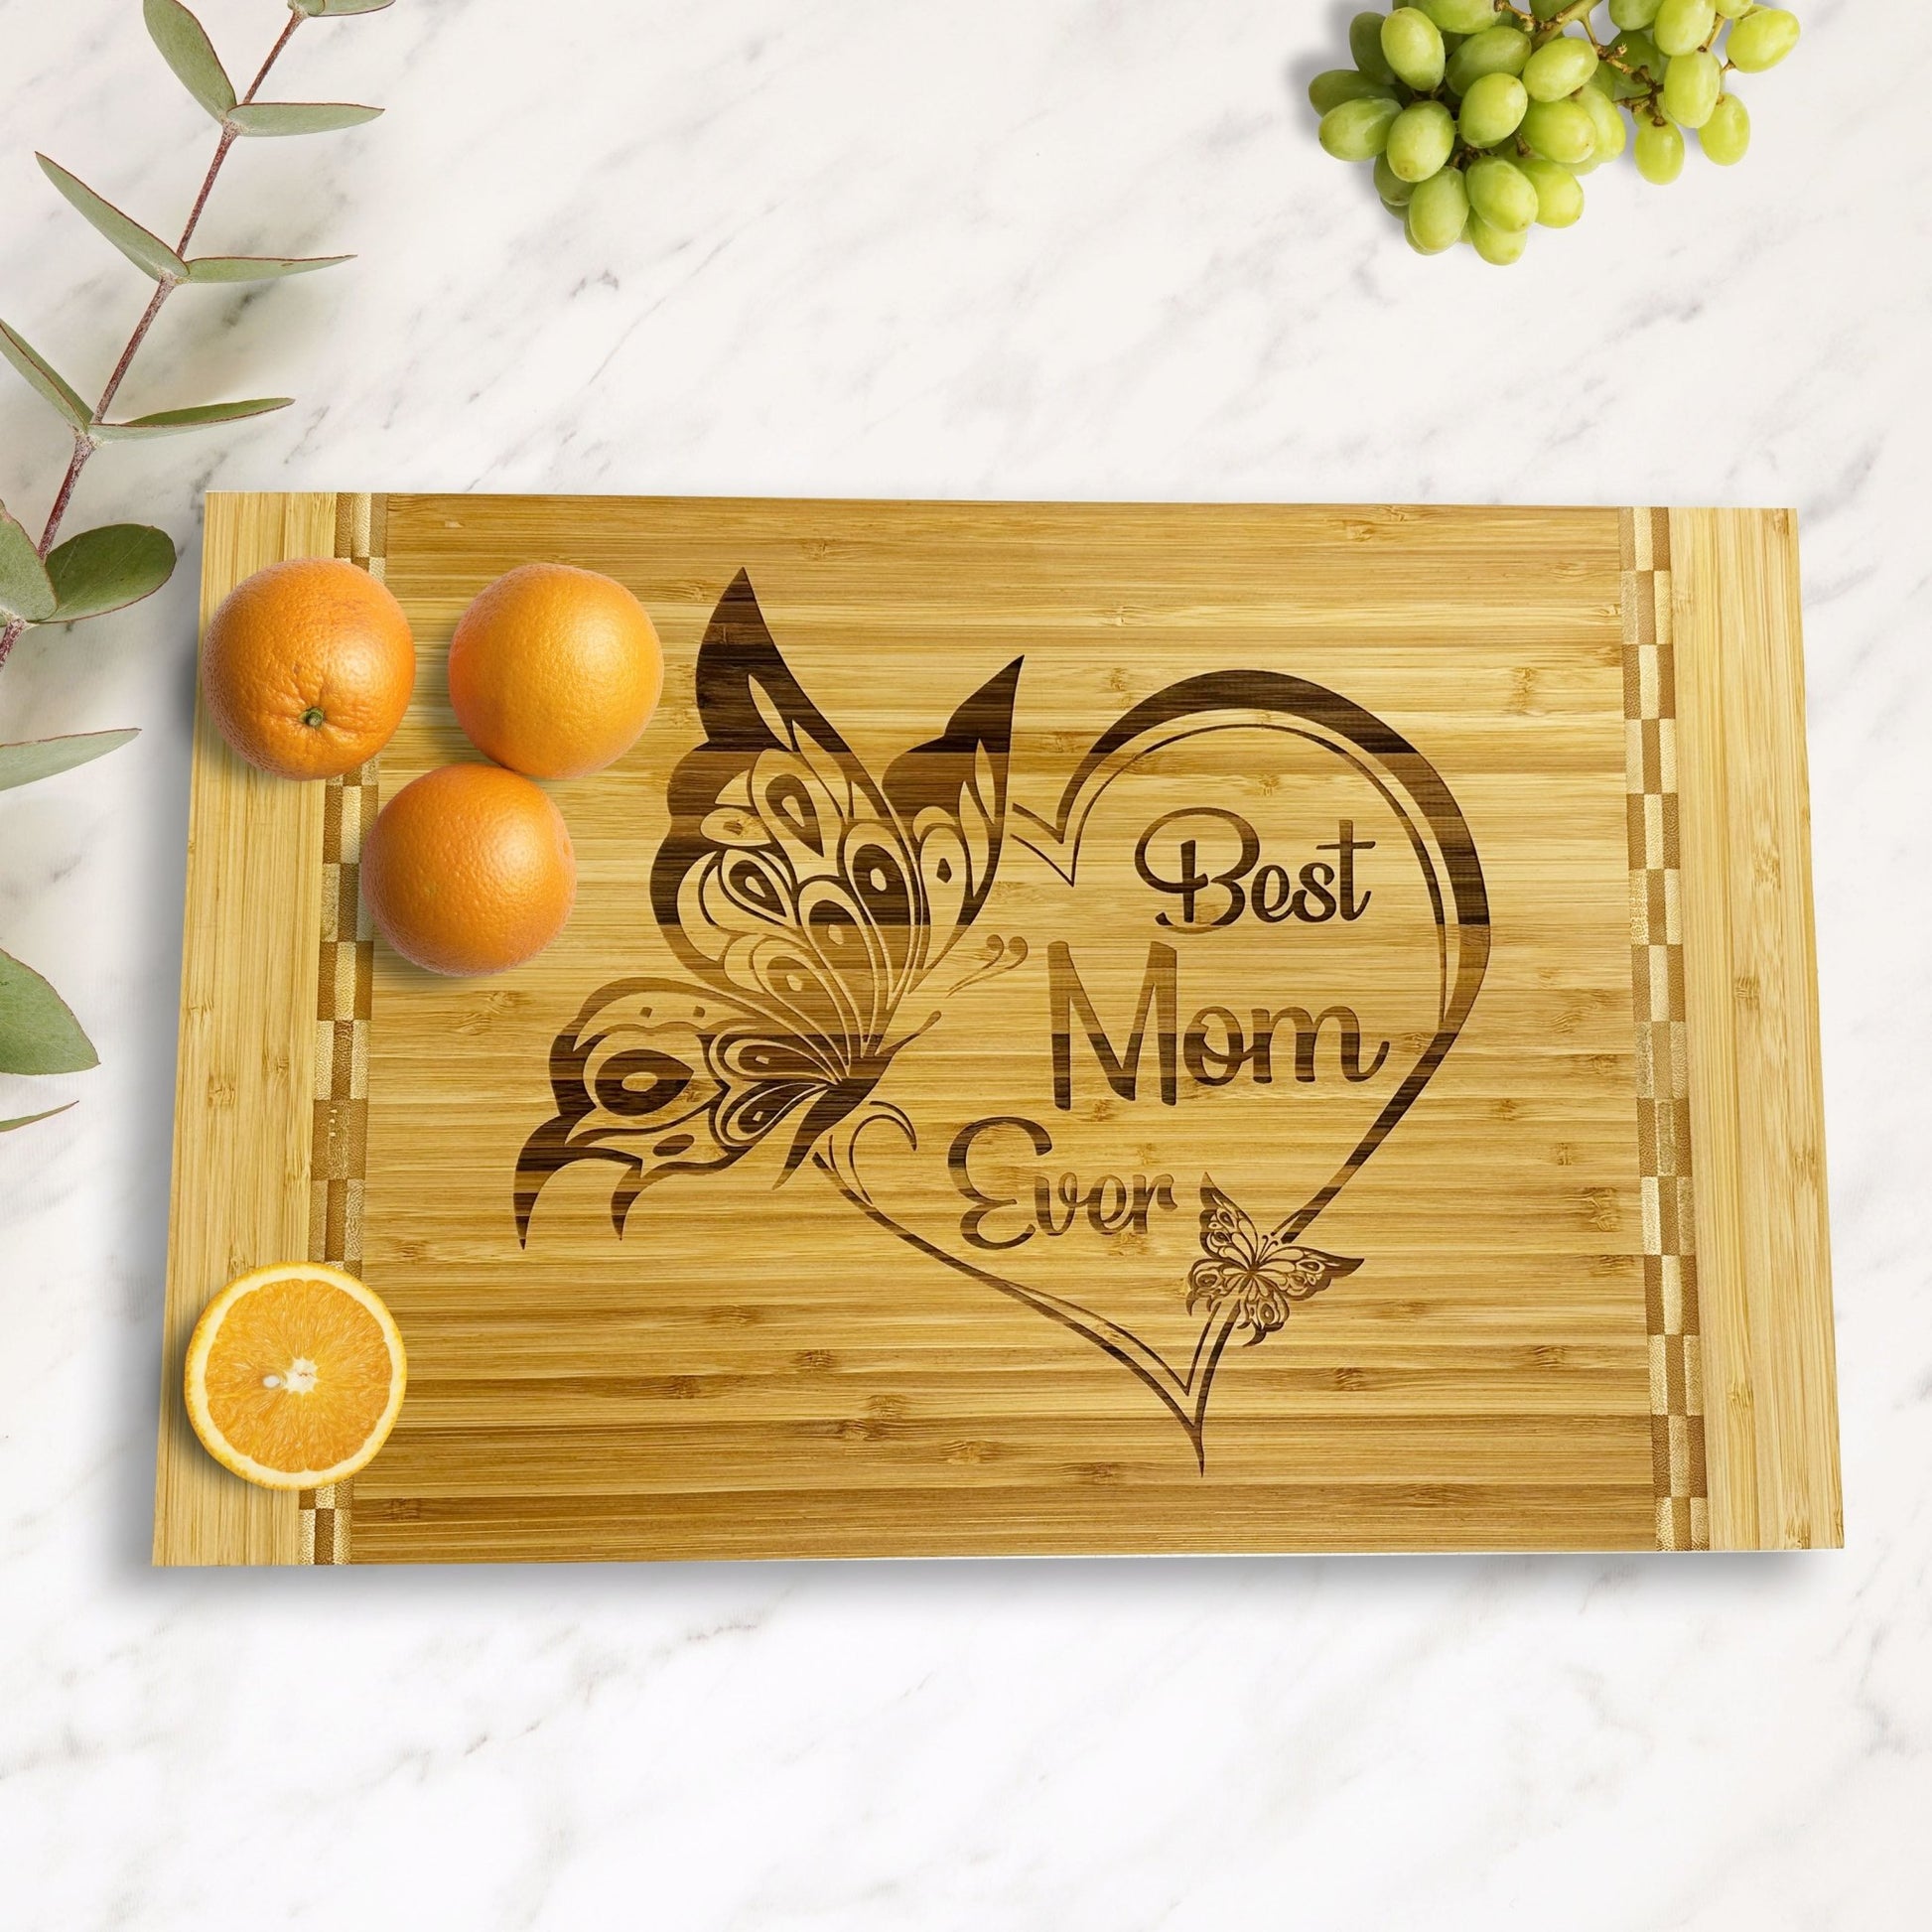 Best Mom Wood Cutting Board Laser Engraved Gift